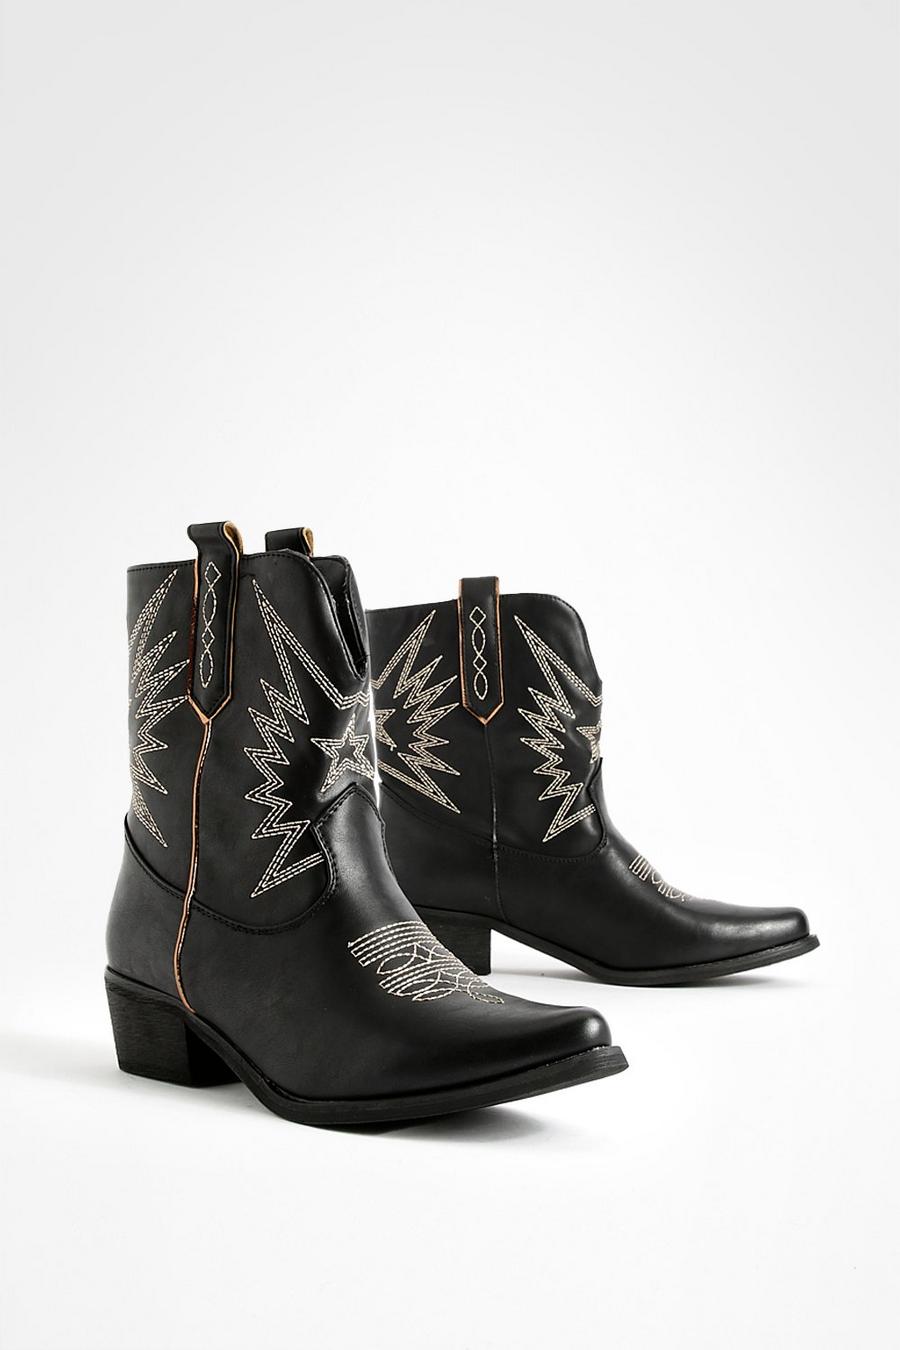 Black Tab Detail Embroidered Ankle Western Cowboy Boots    